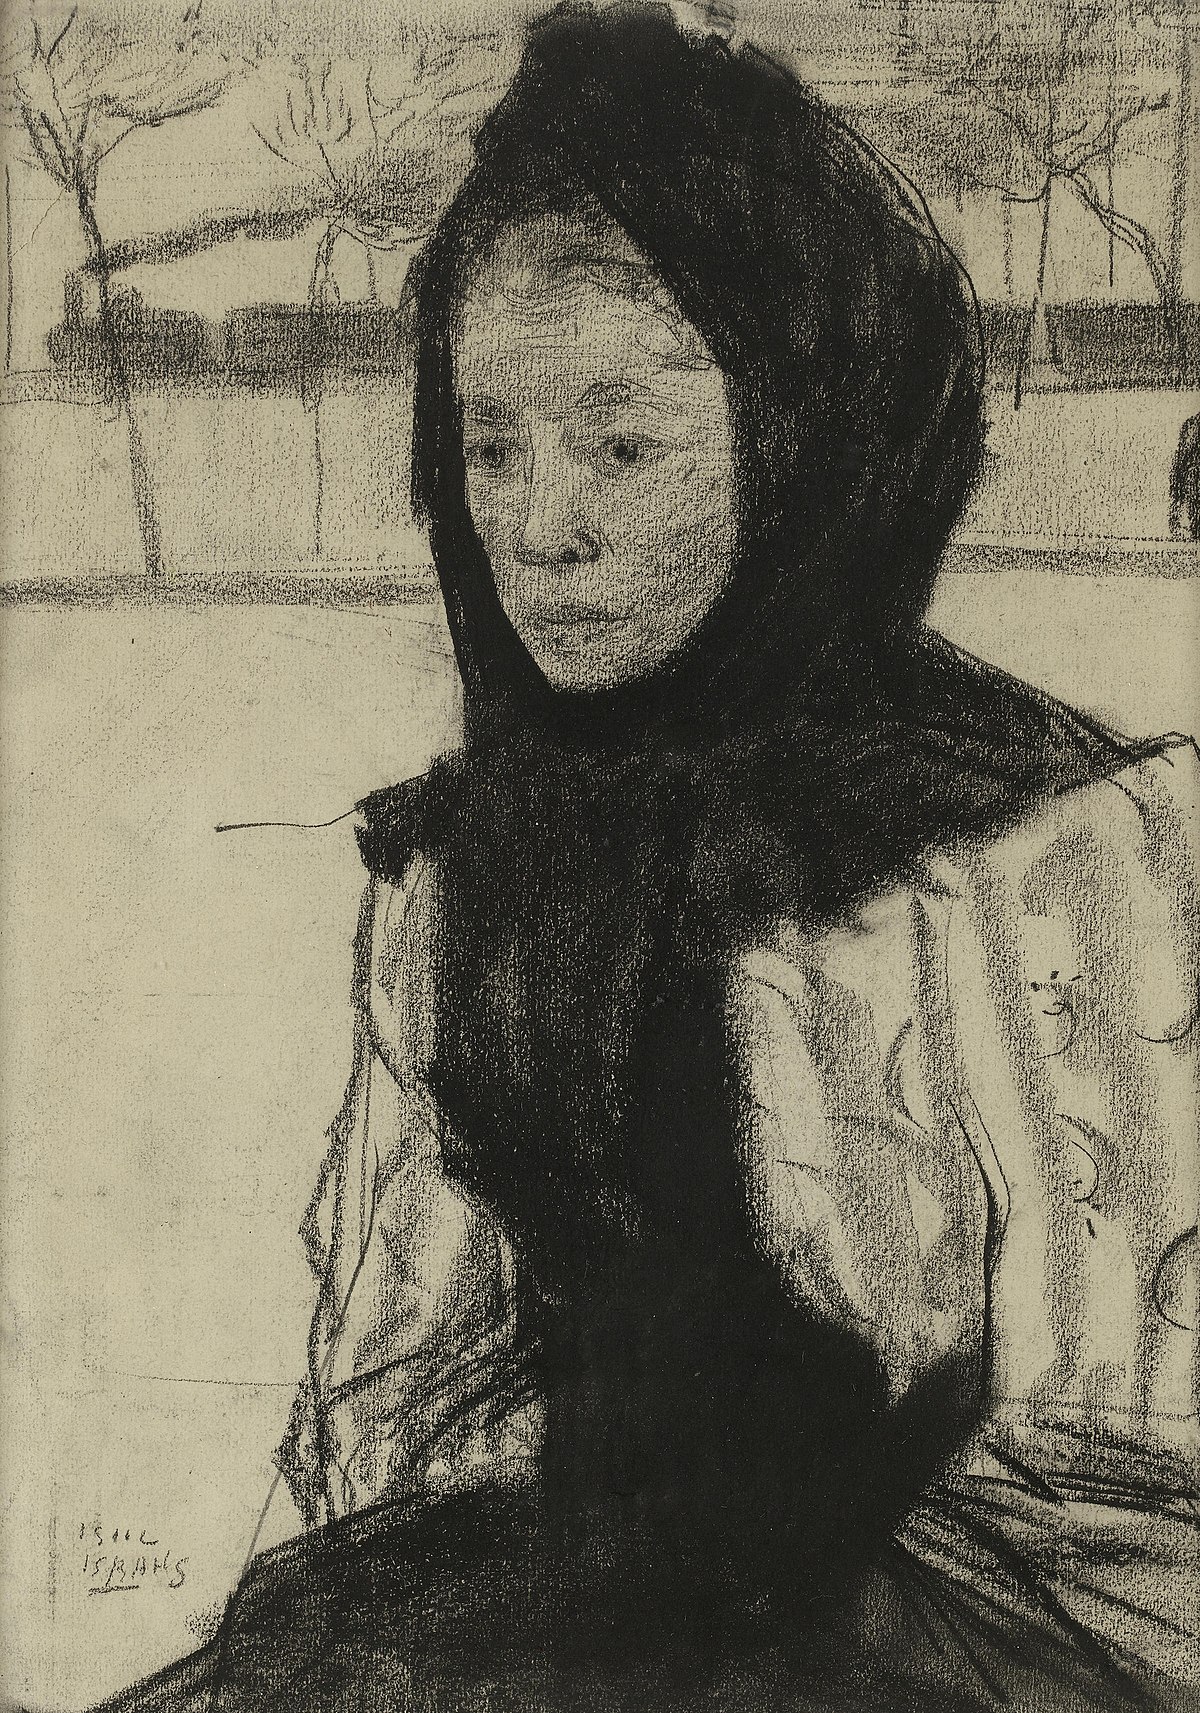 File:2017-02 Isaac Israels - Woman with headscarf.jpg - Wikimedia Commons